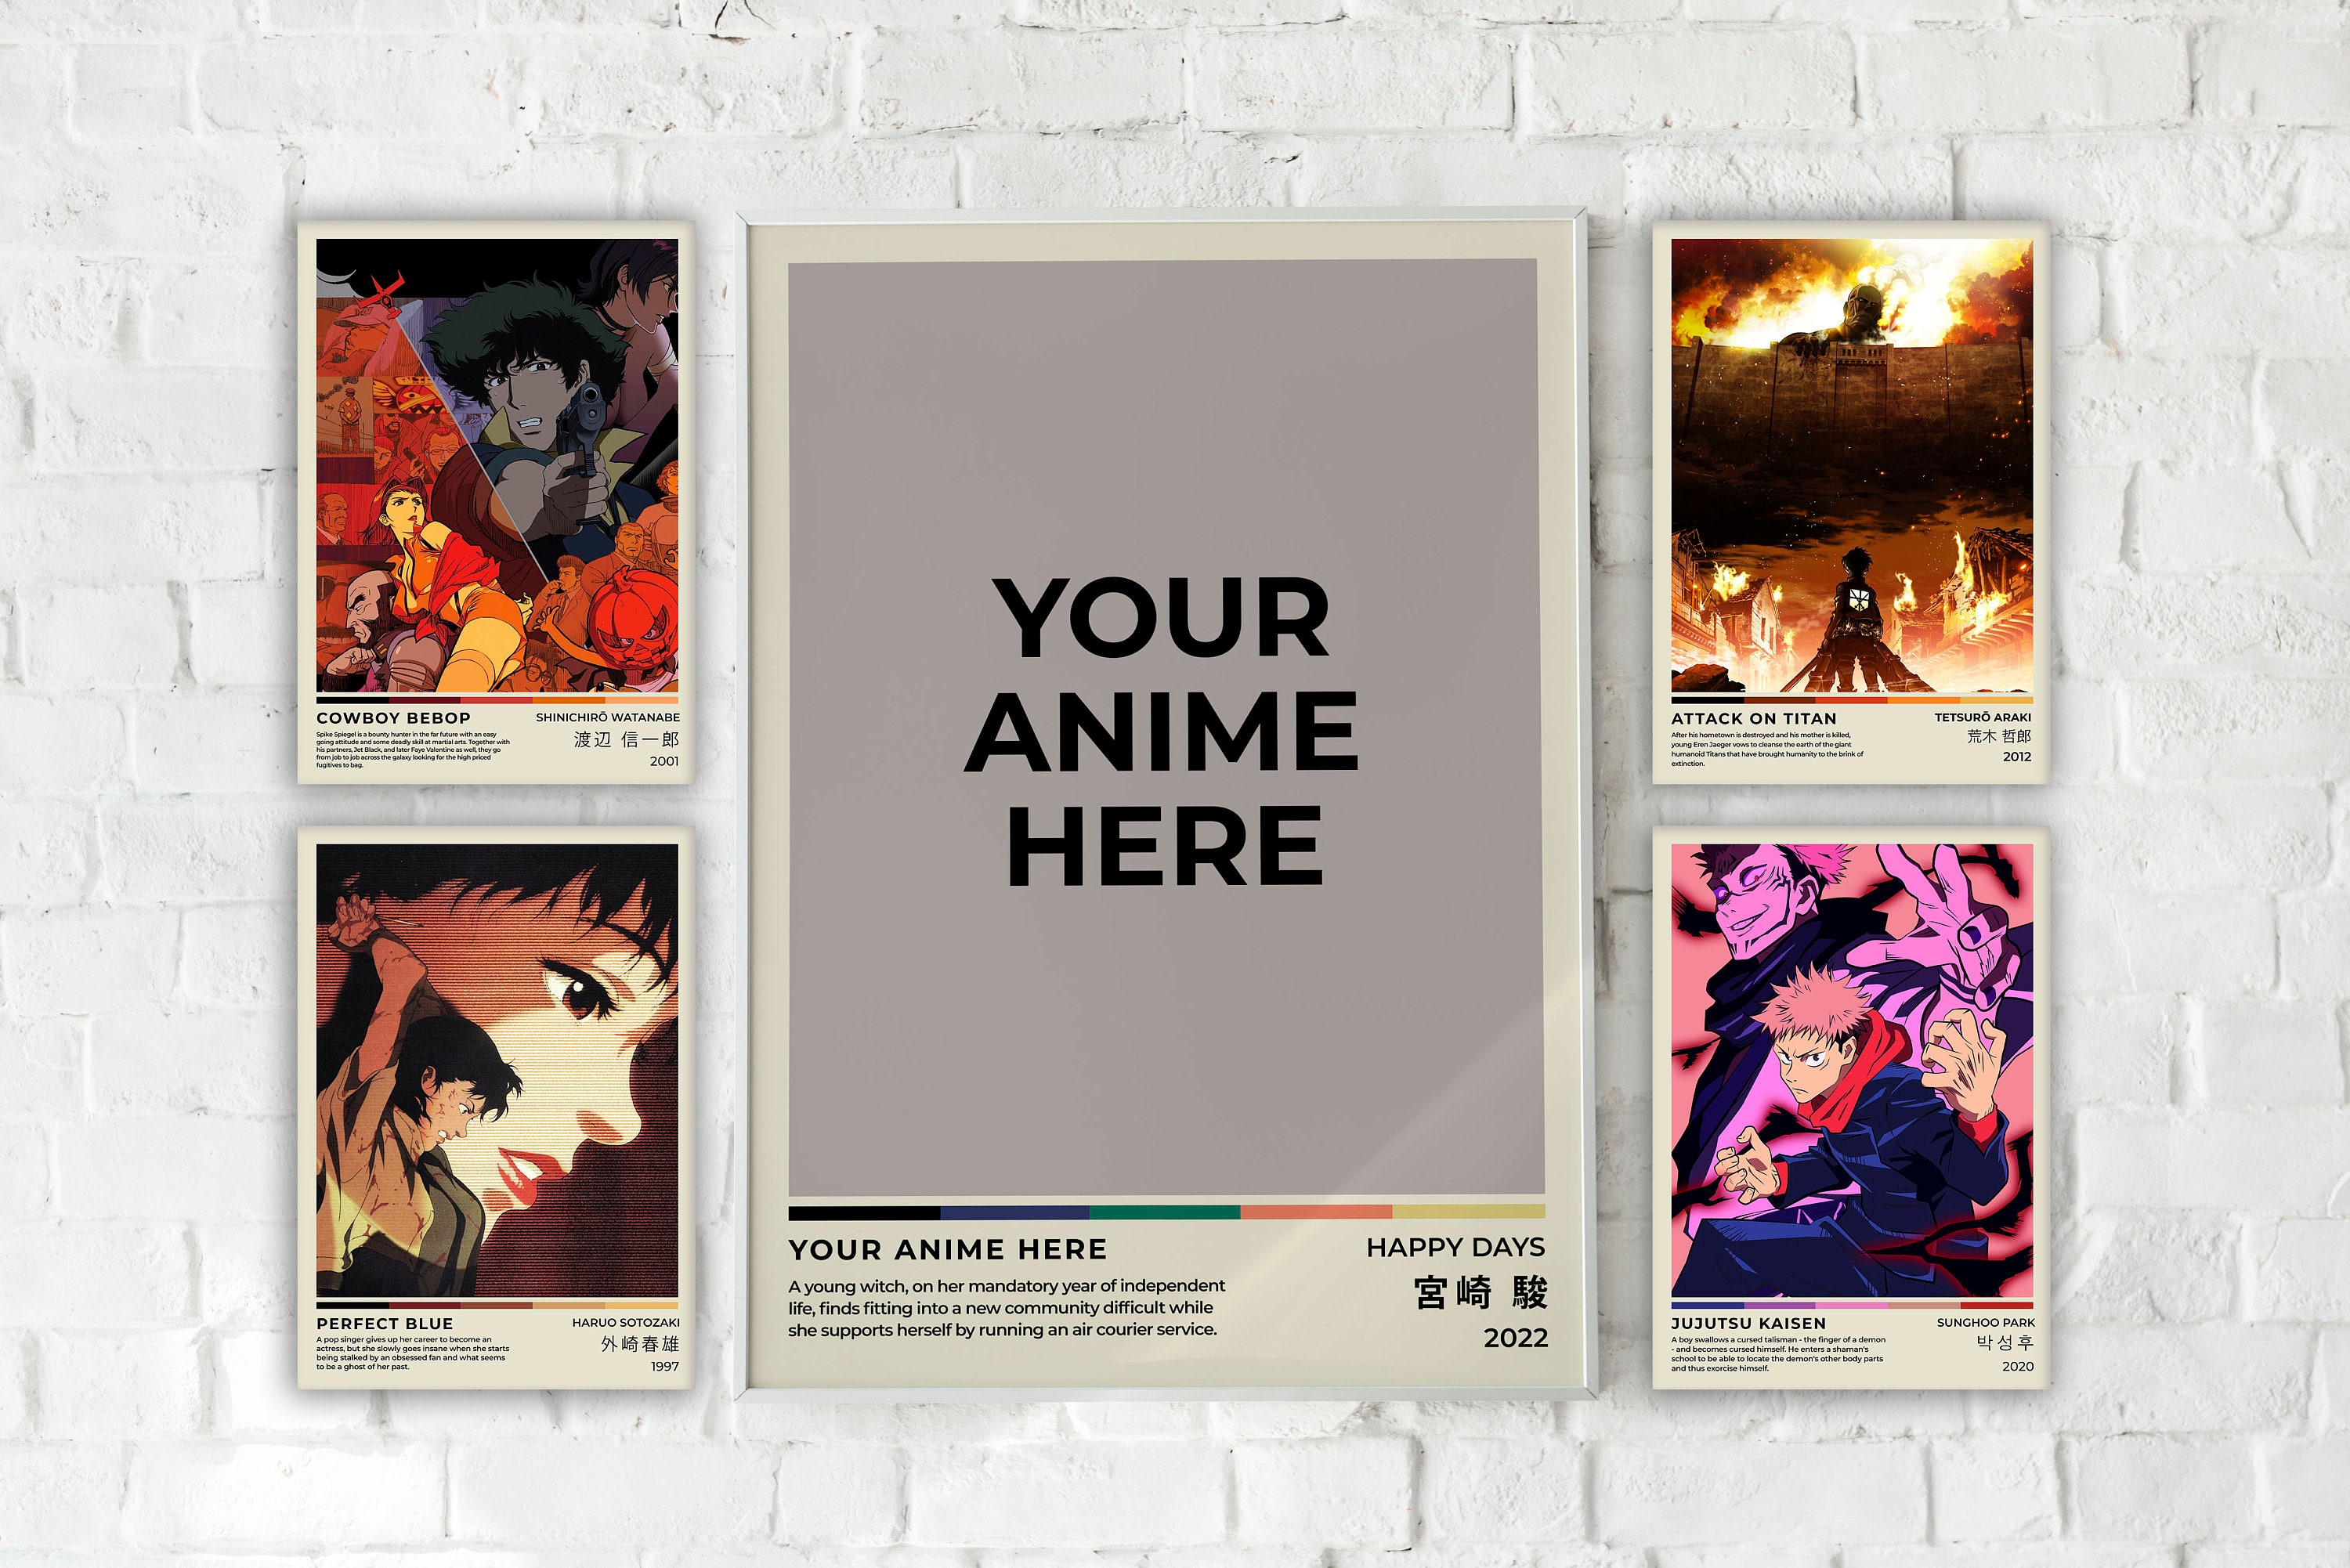 JUMANT Naruto Posters for Bedroom  UNFRAMED 8x10  Anime Posters for Room   Itachi Poster  Anime Room Decor  Anime Wall Decor  Naruto Room Decor   Anime Decor 